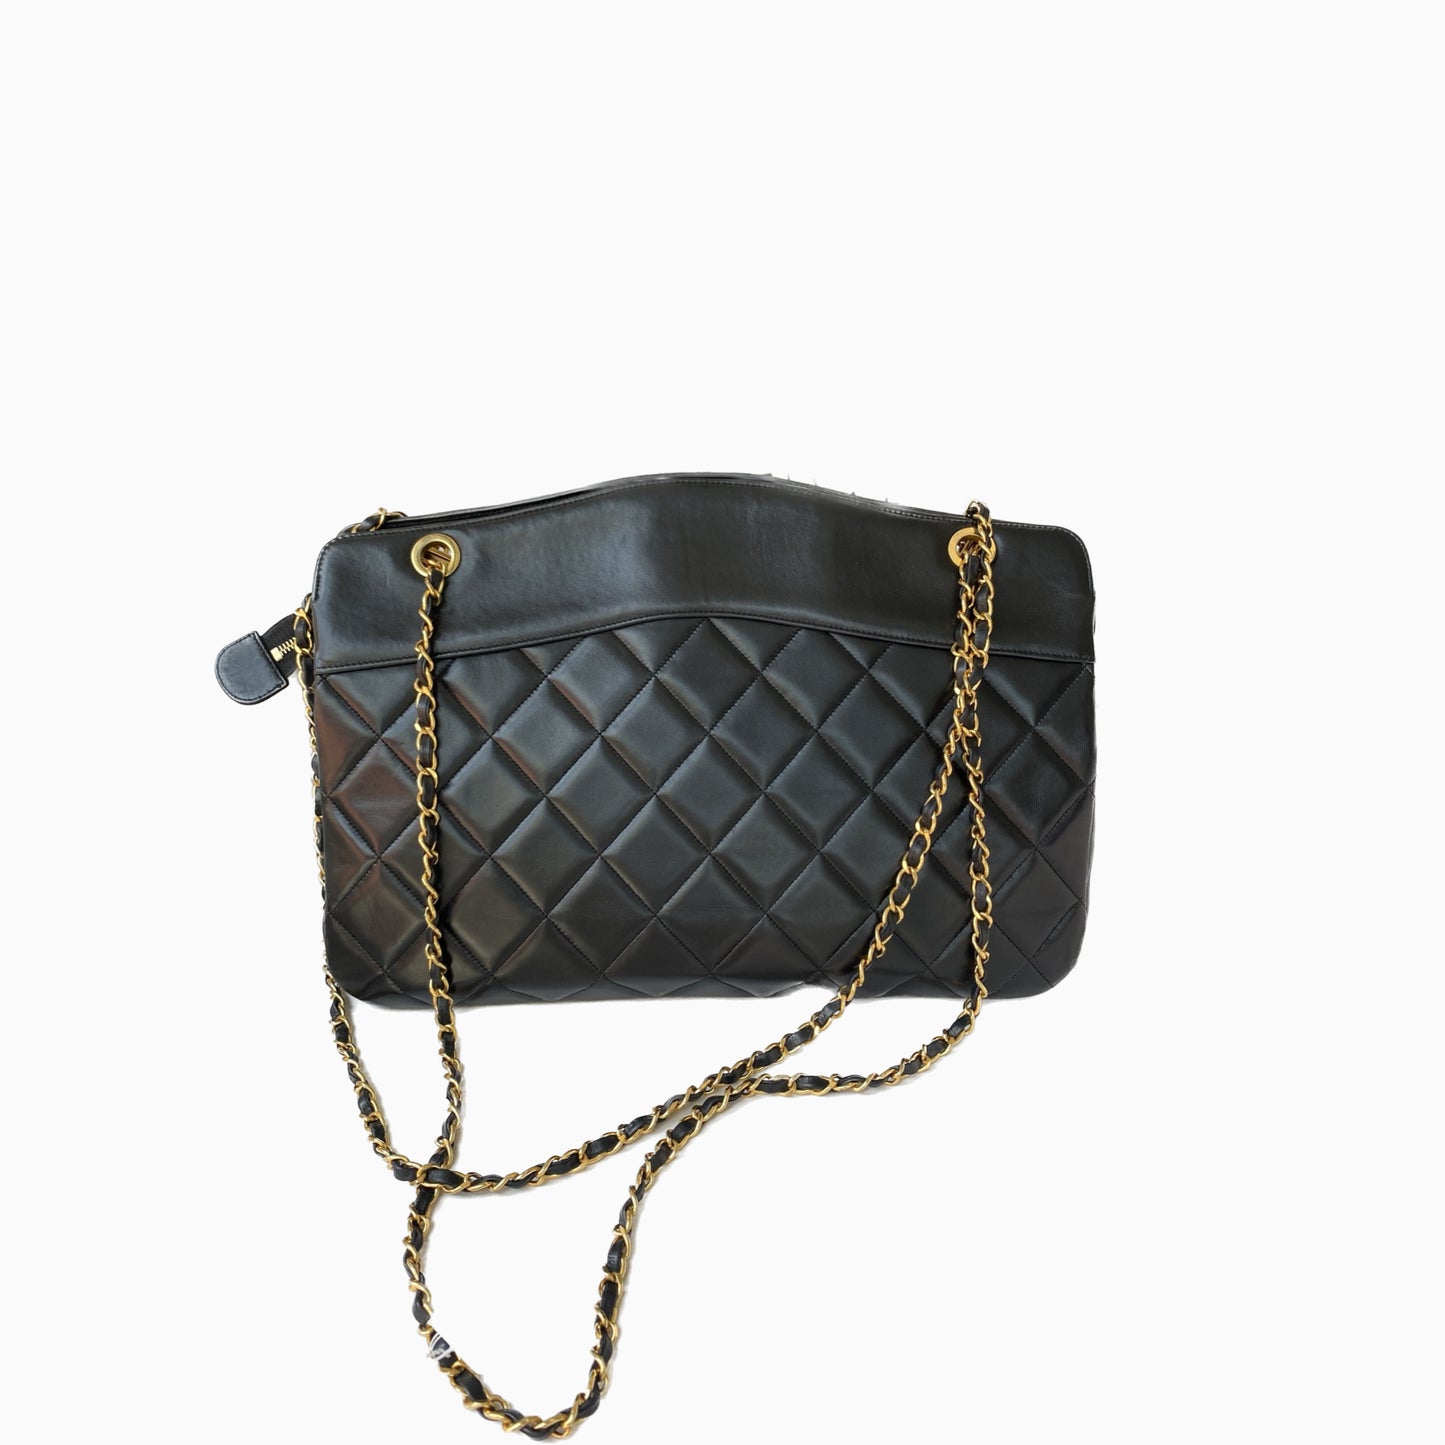 chanel chain quilted bag black